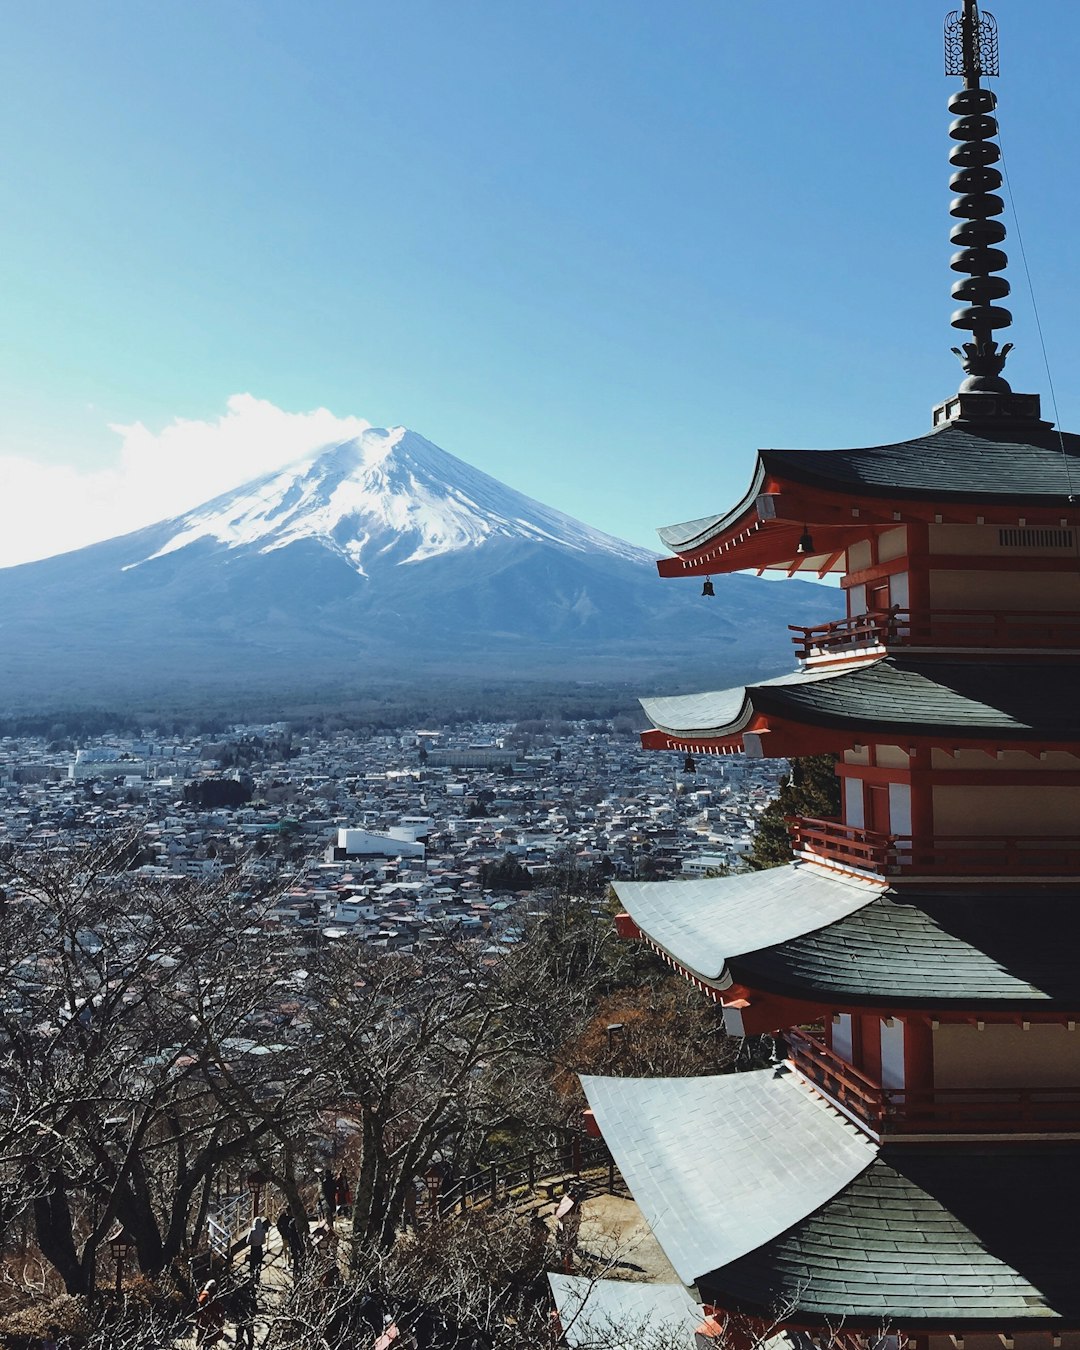 travelers stories about Pagoda in Mount fuji, Japan